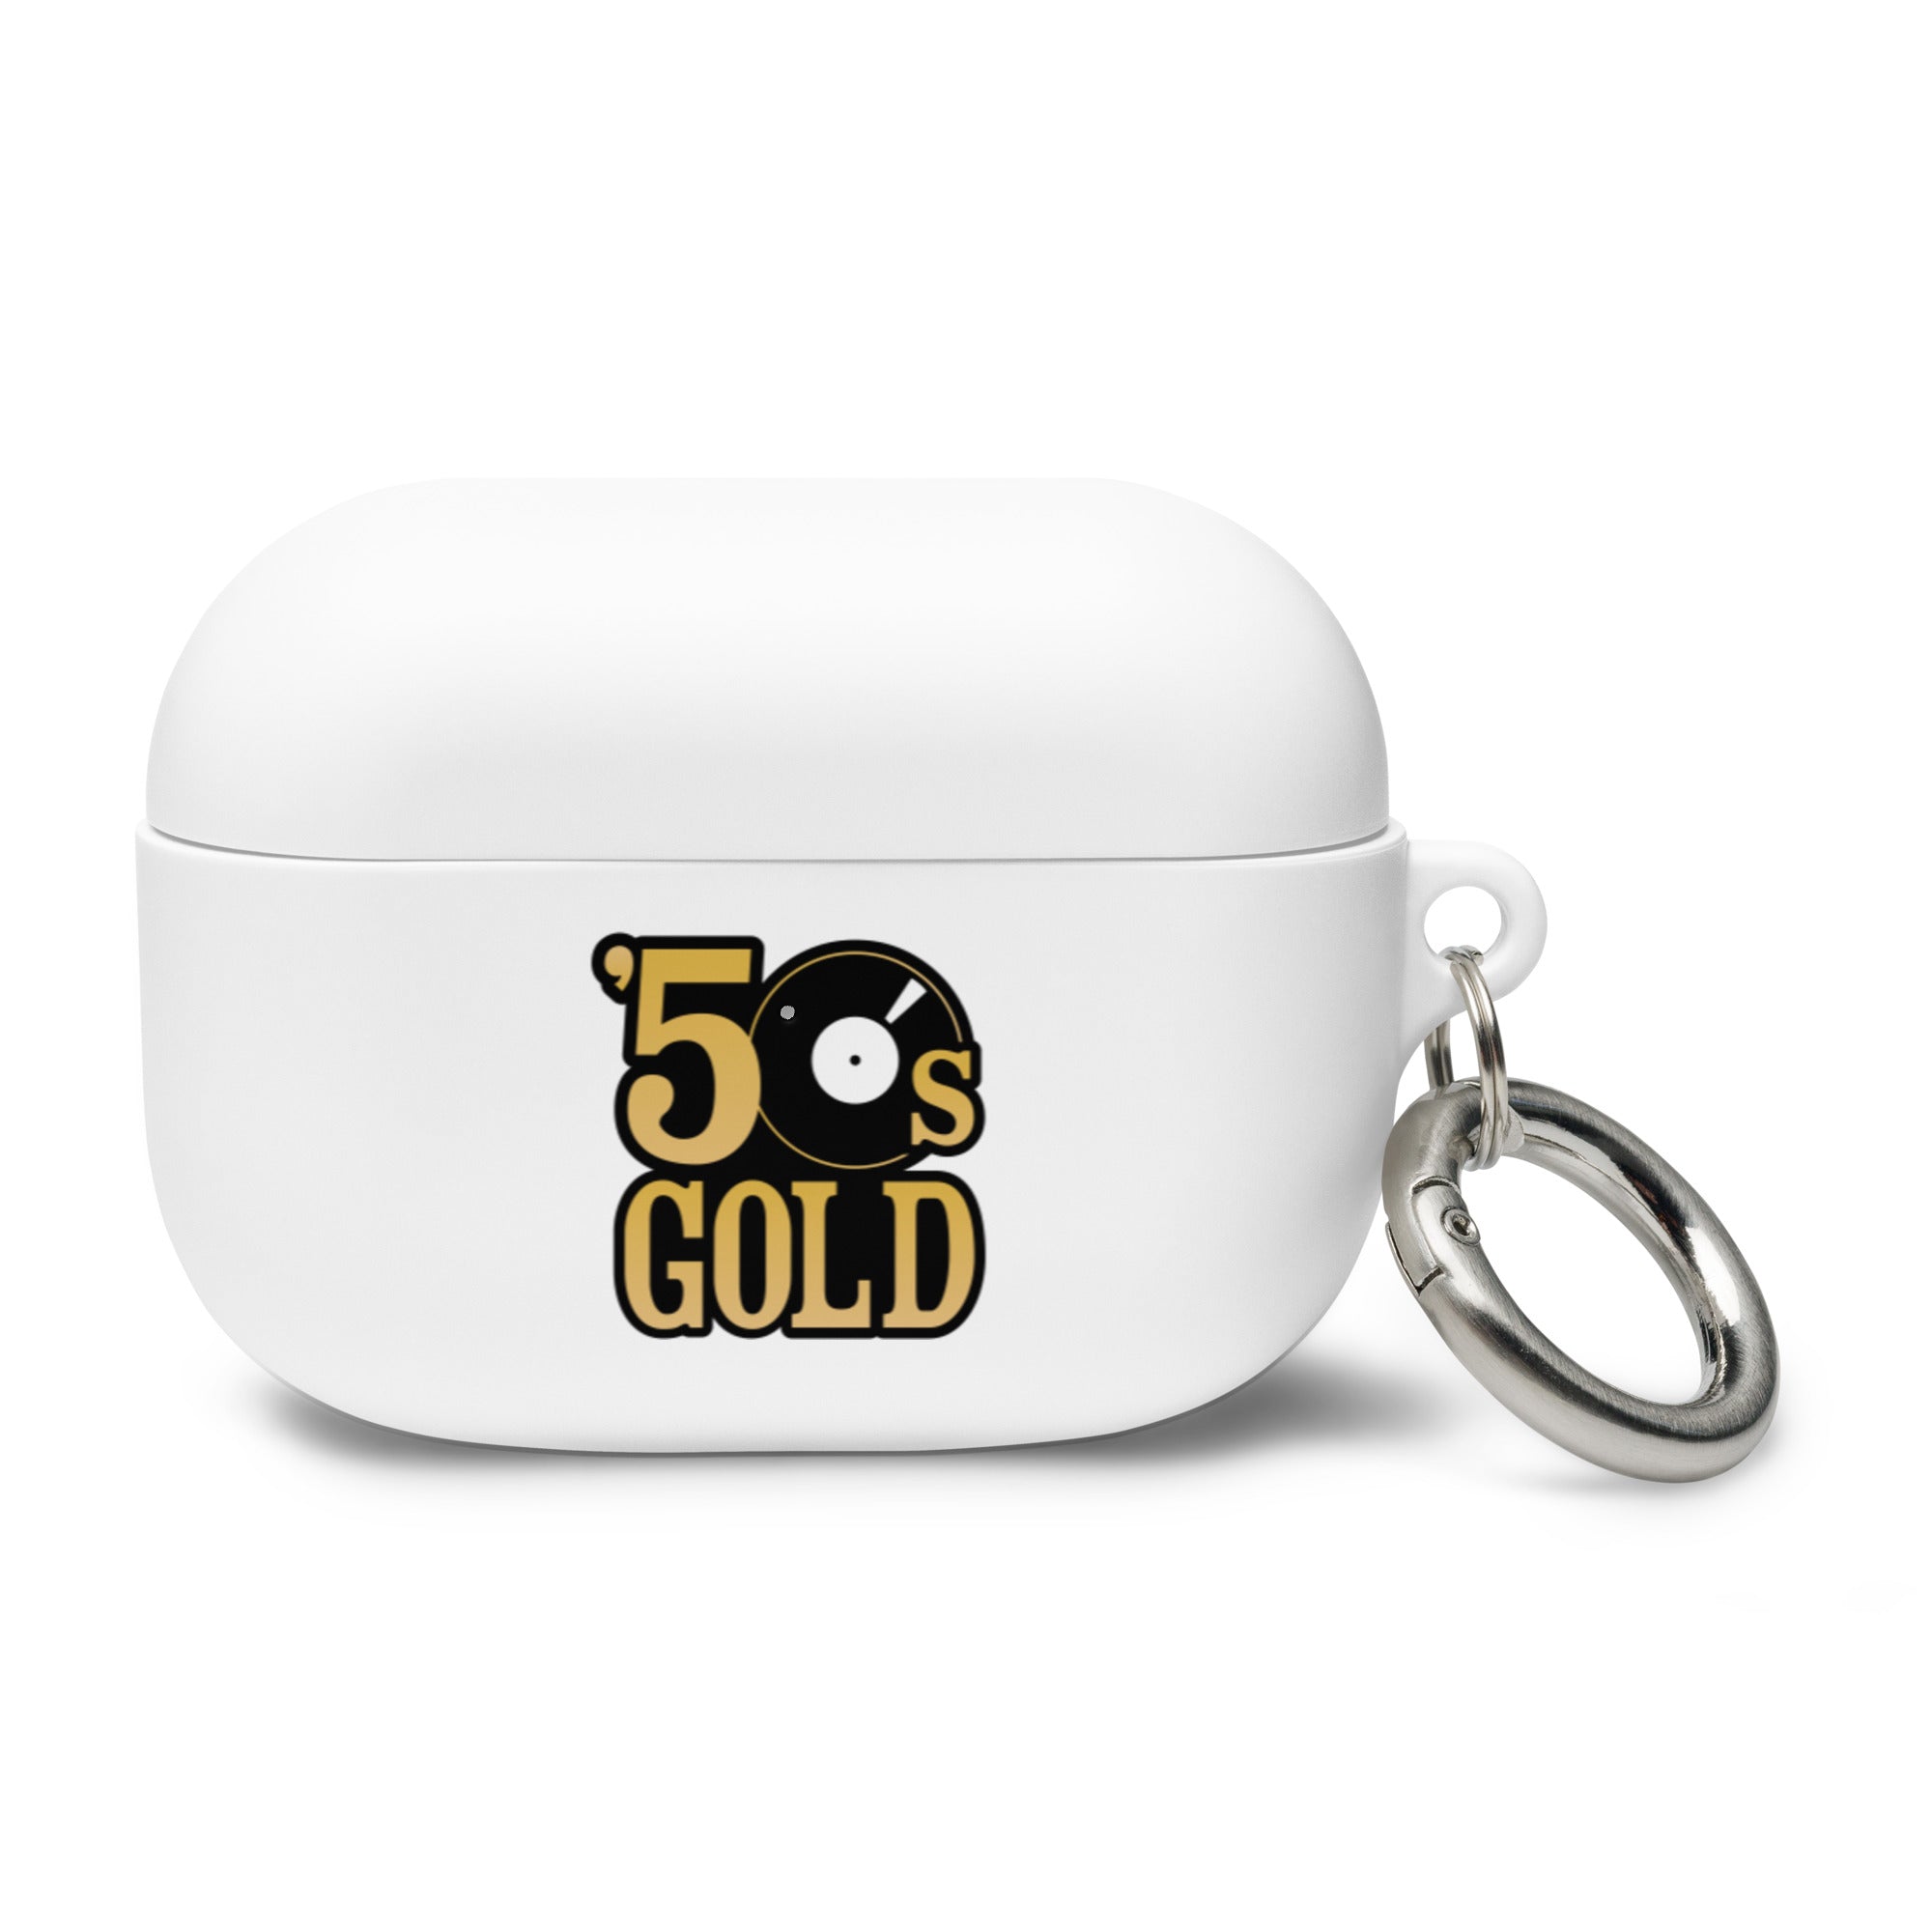 50s Gold: AirPods® Case Cover